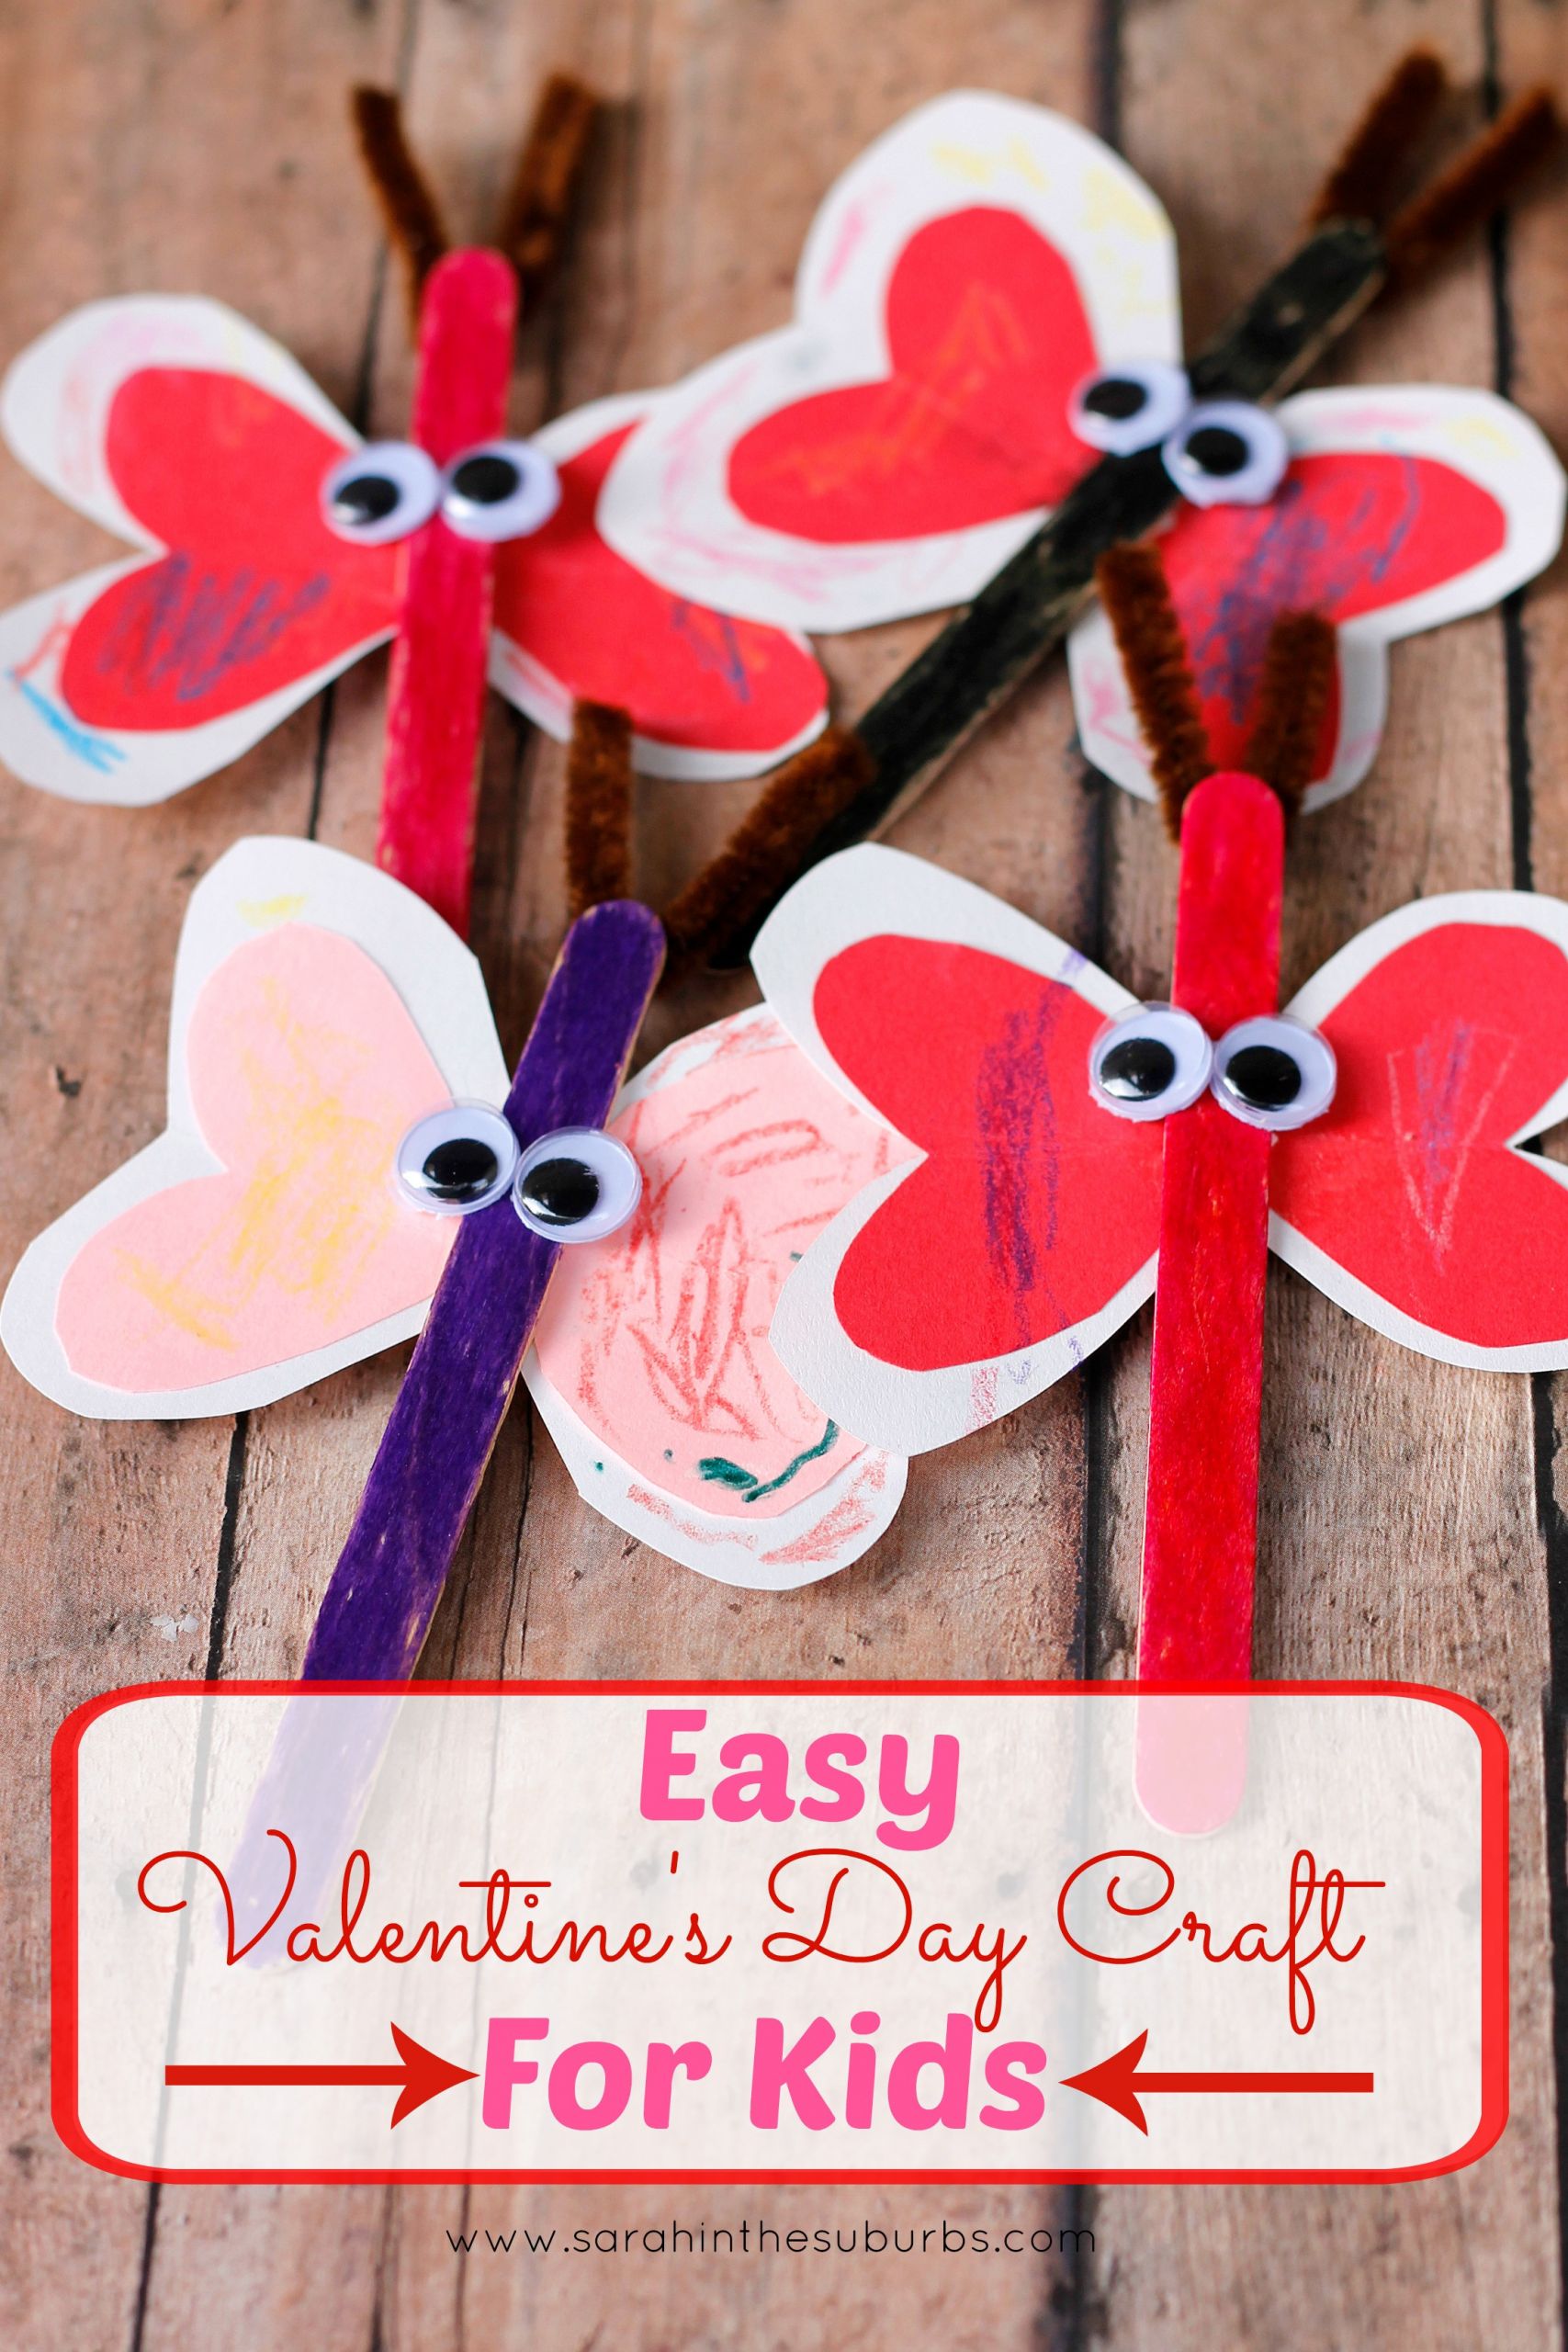 Craft Supplies For Kids
 Love Bug Valentine s Day Craft for Kids Sarah in the Suburbs